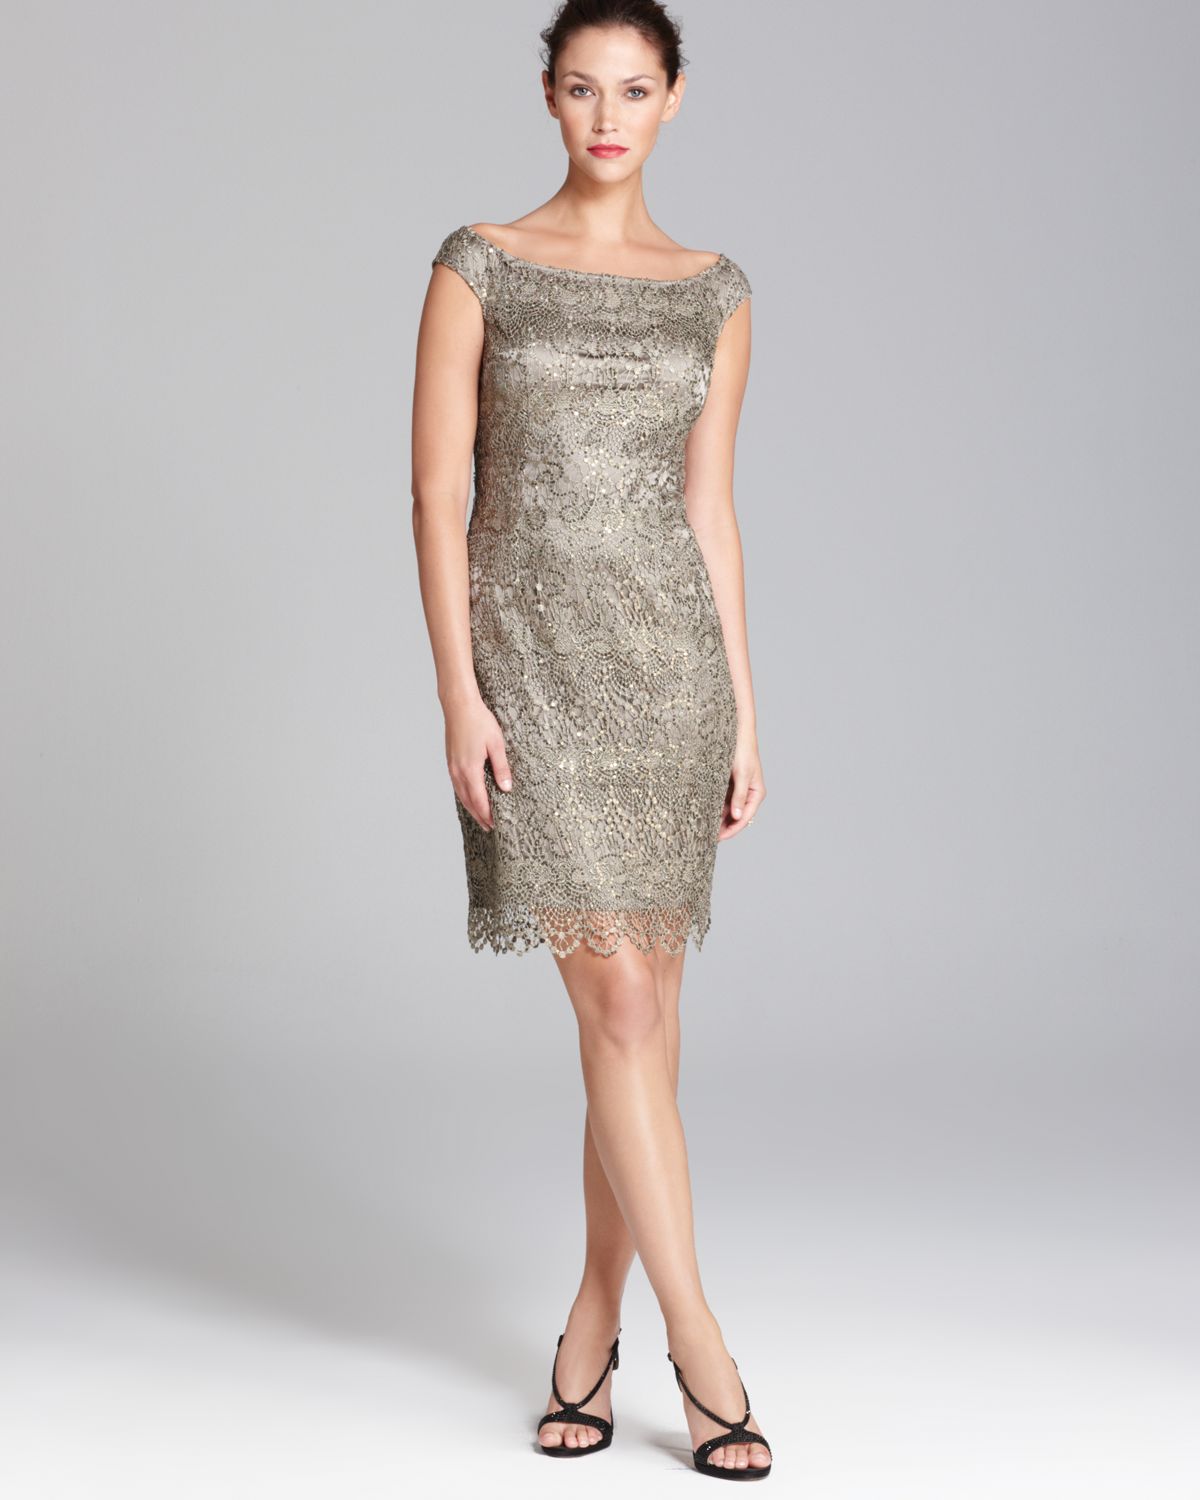 Lyst - Kay Unger Sequin Lace Dress Boat Neck in Gray